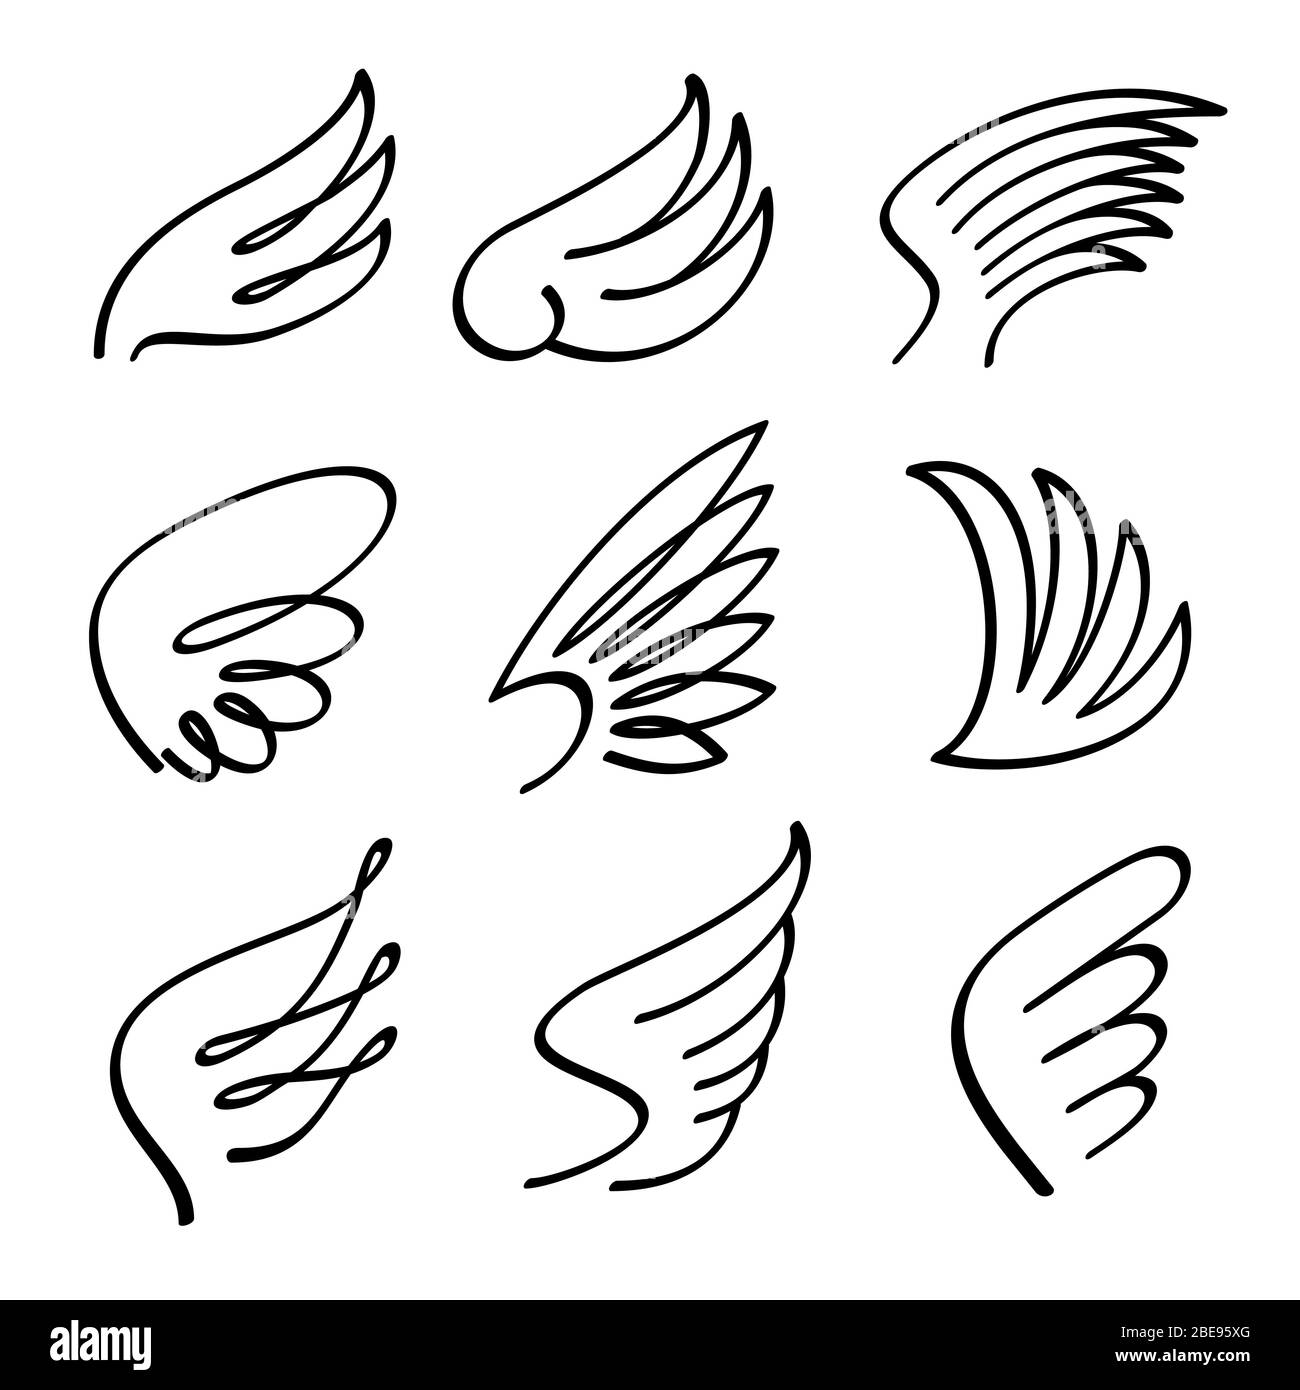 Cartoon angel wings vector set. Sketch doodle winged abstract emblems isolated on white background. Wing bird cartoon black illustration Stock Vector